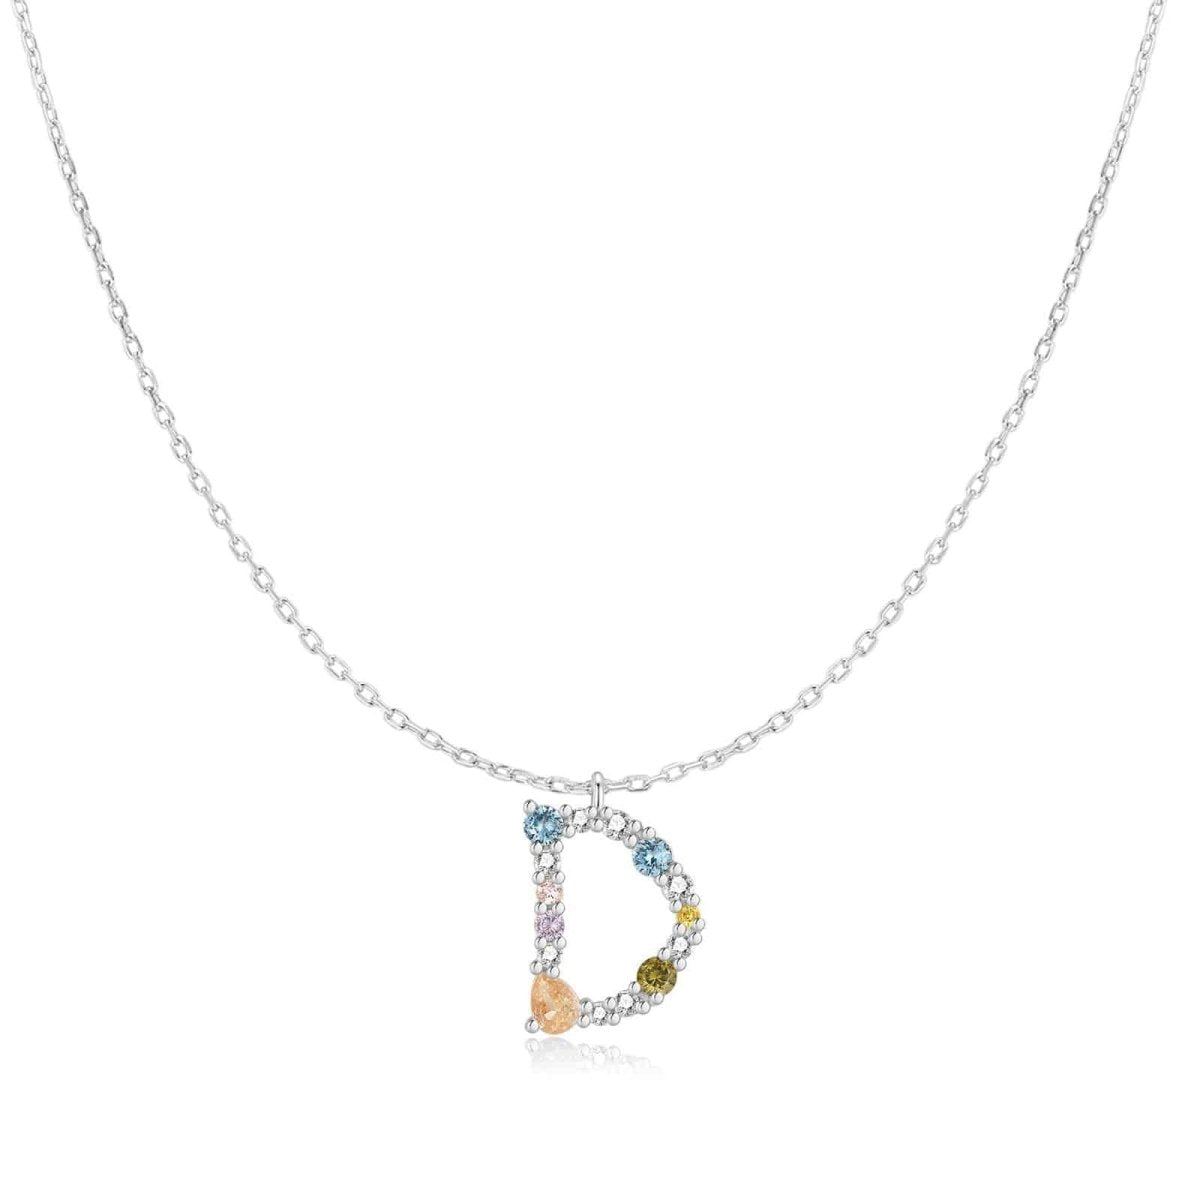 "My Initial" Necklace - Milas Jewels Shop